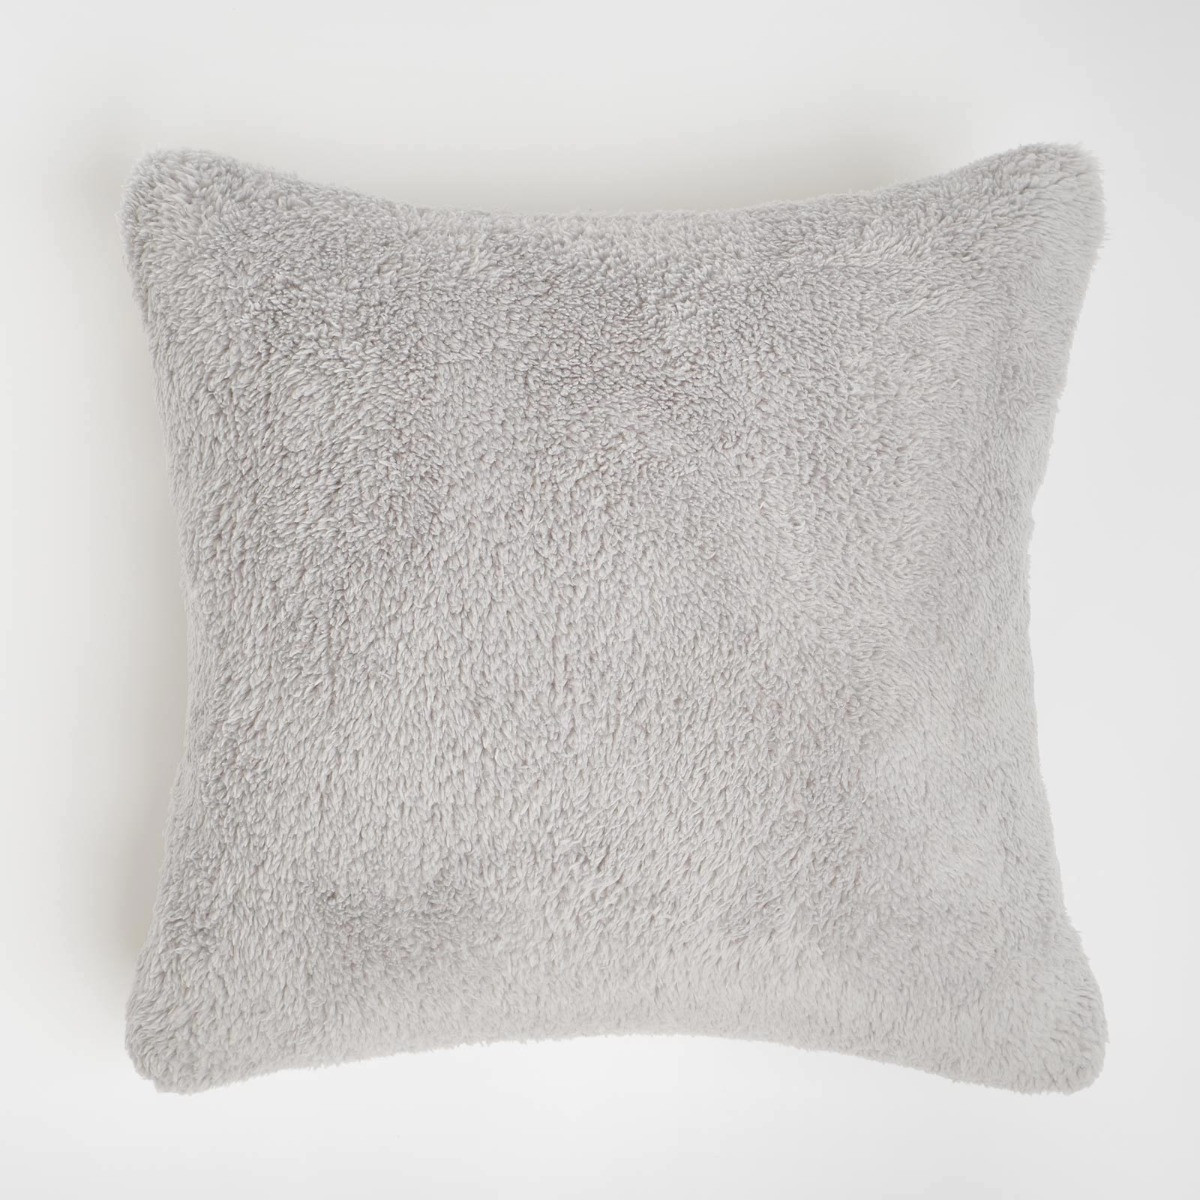 Brentfords 4 Pack Teddy Cushion Covers - Silver>